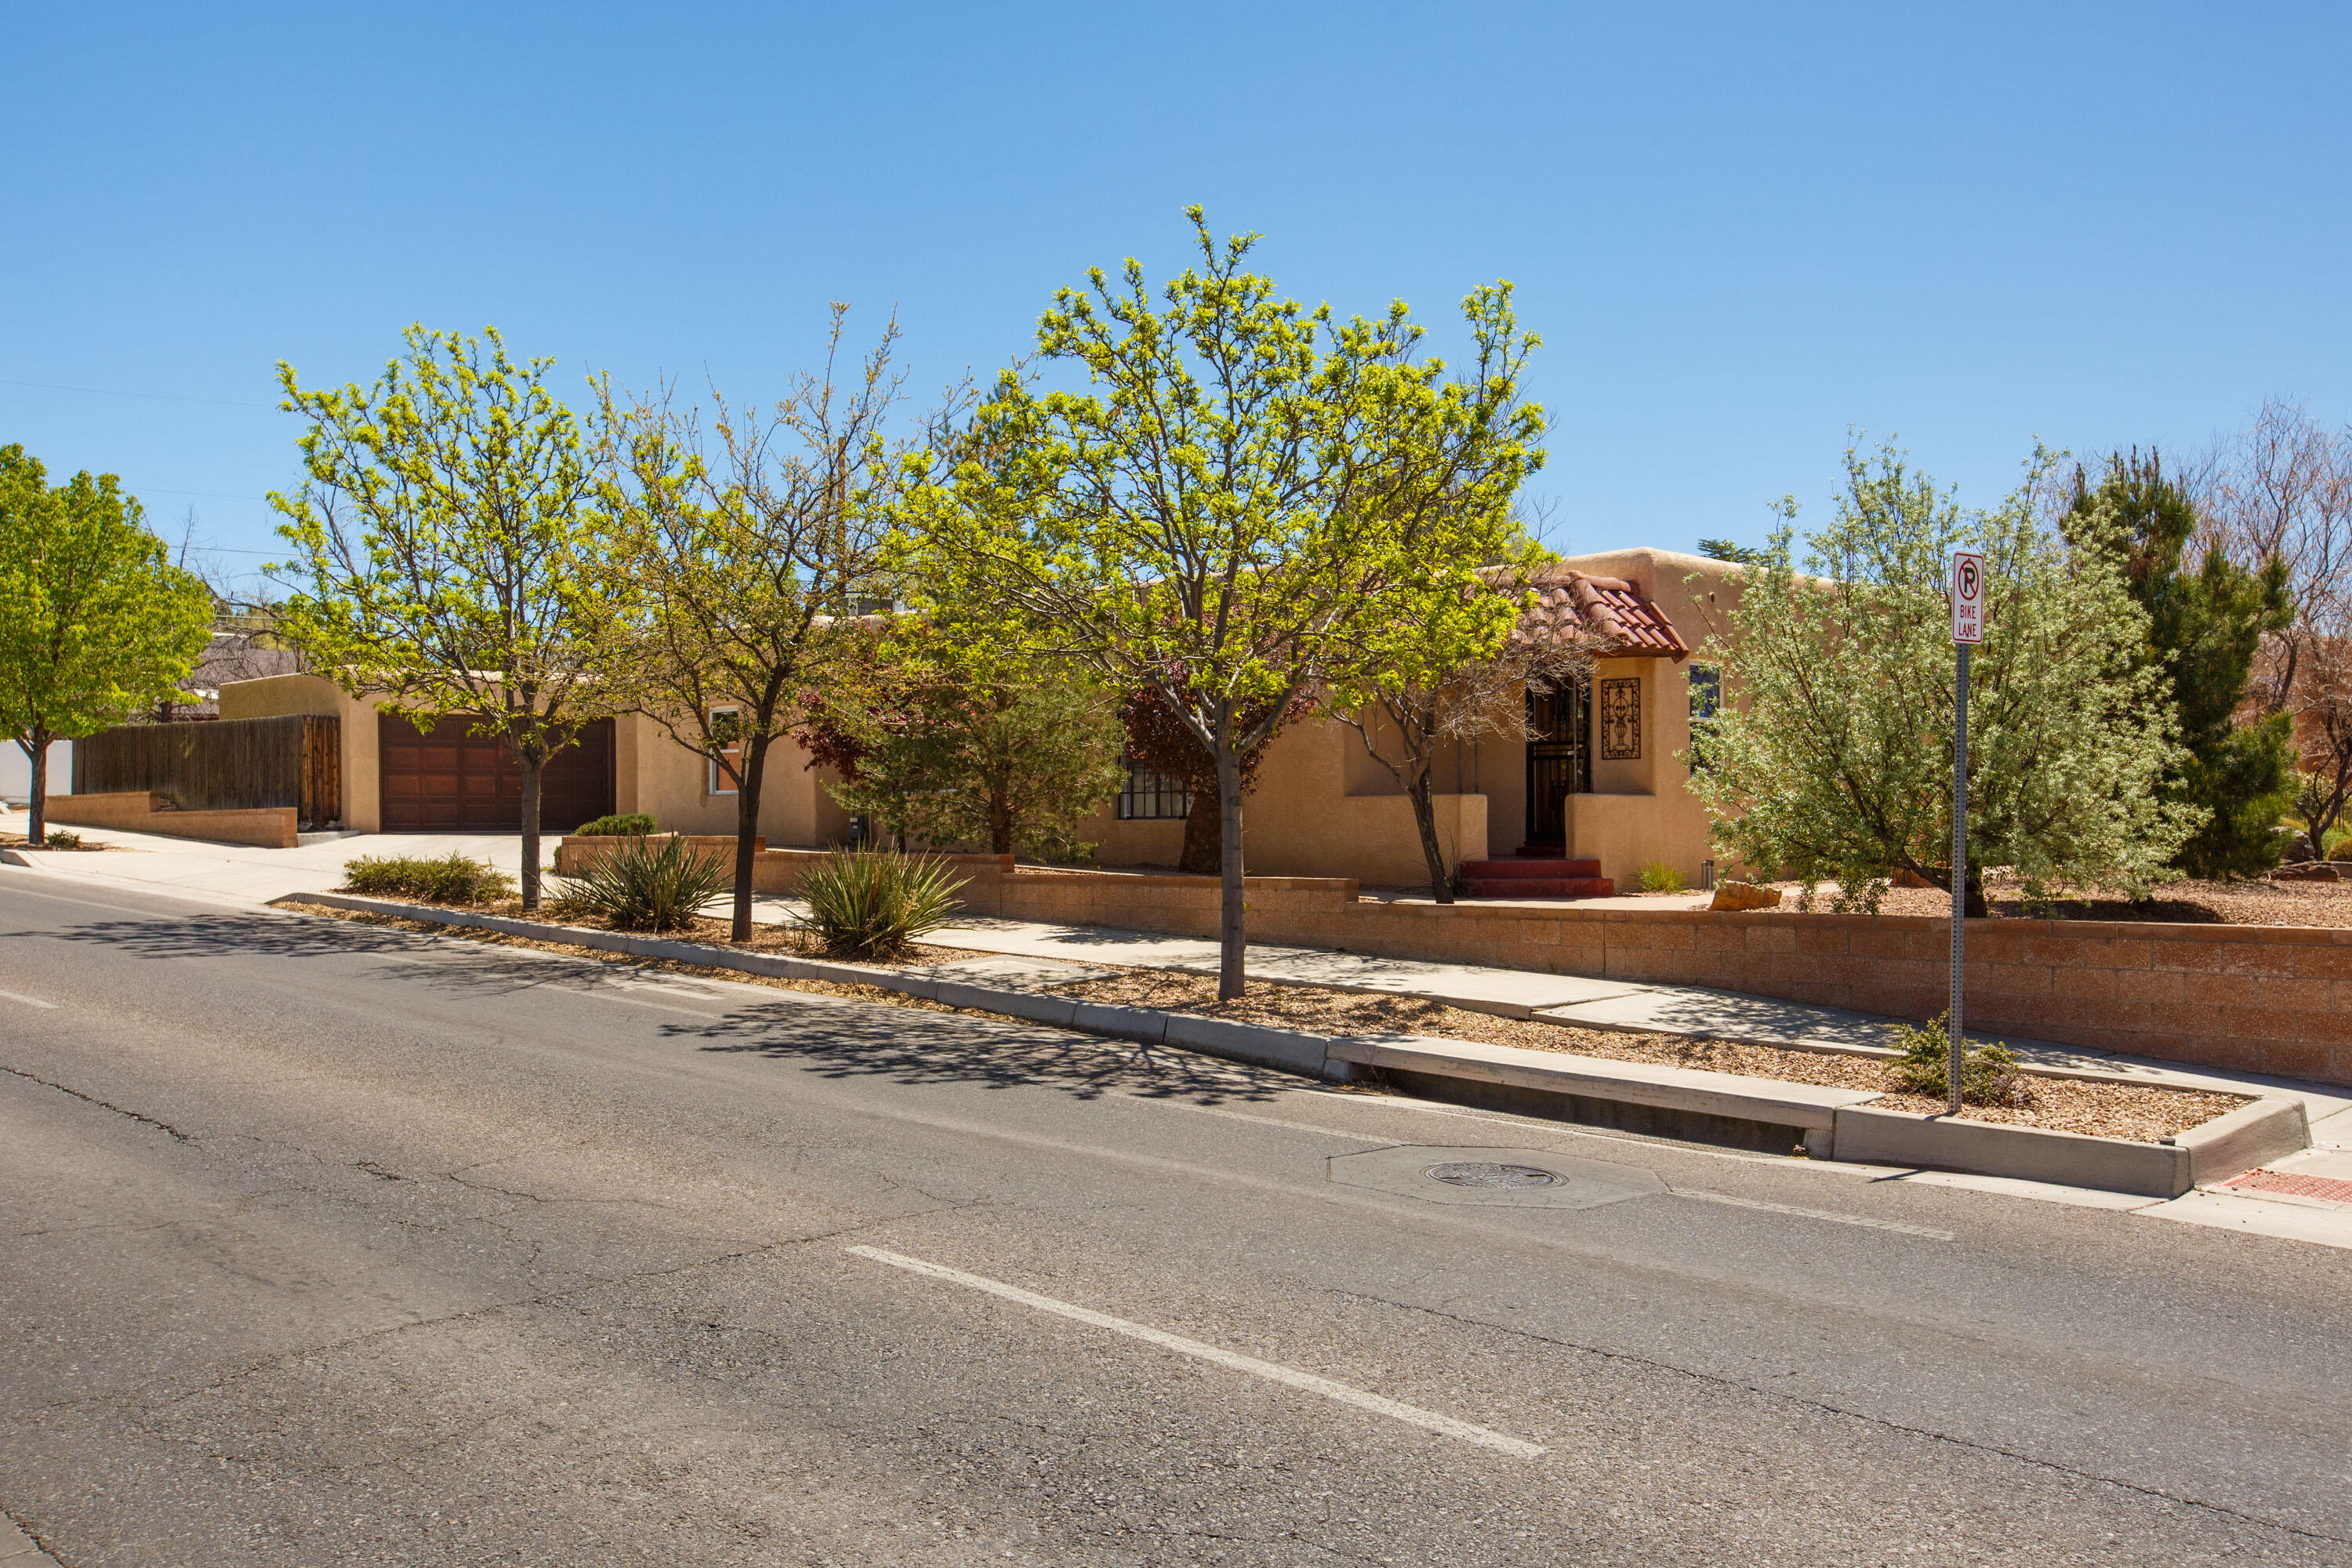 400 Amherst Drive SE, Albuquerque, New Mexico 87106, 2 Bedrooms Bedrooms, ,2 BathroomsBathrooms,Residential,For Sale,400 Amherst Drive SE,1061008